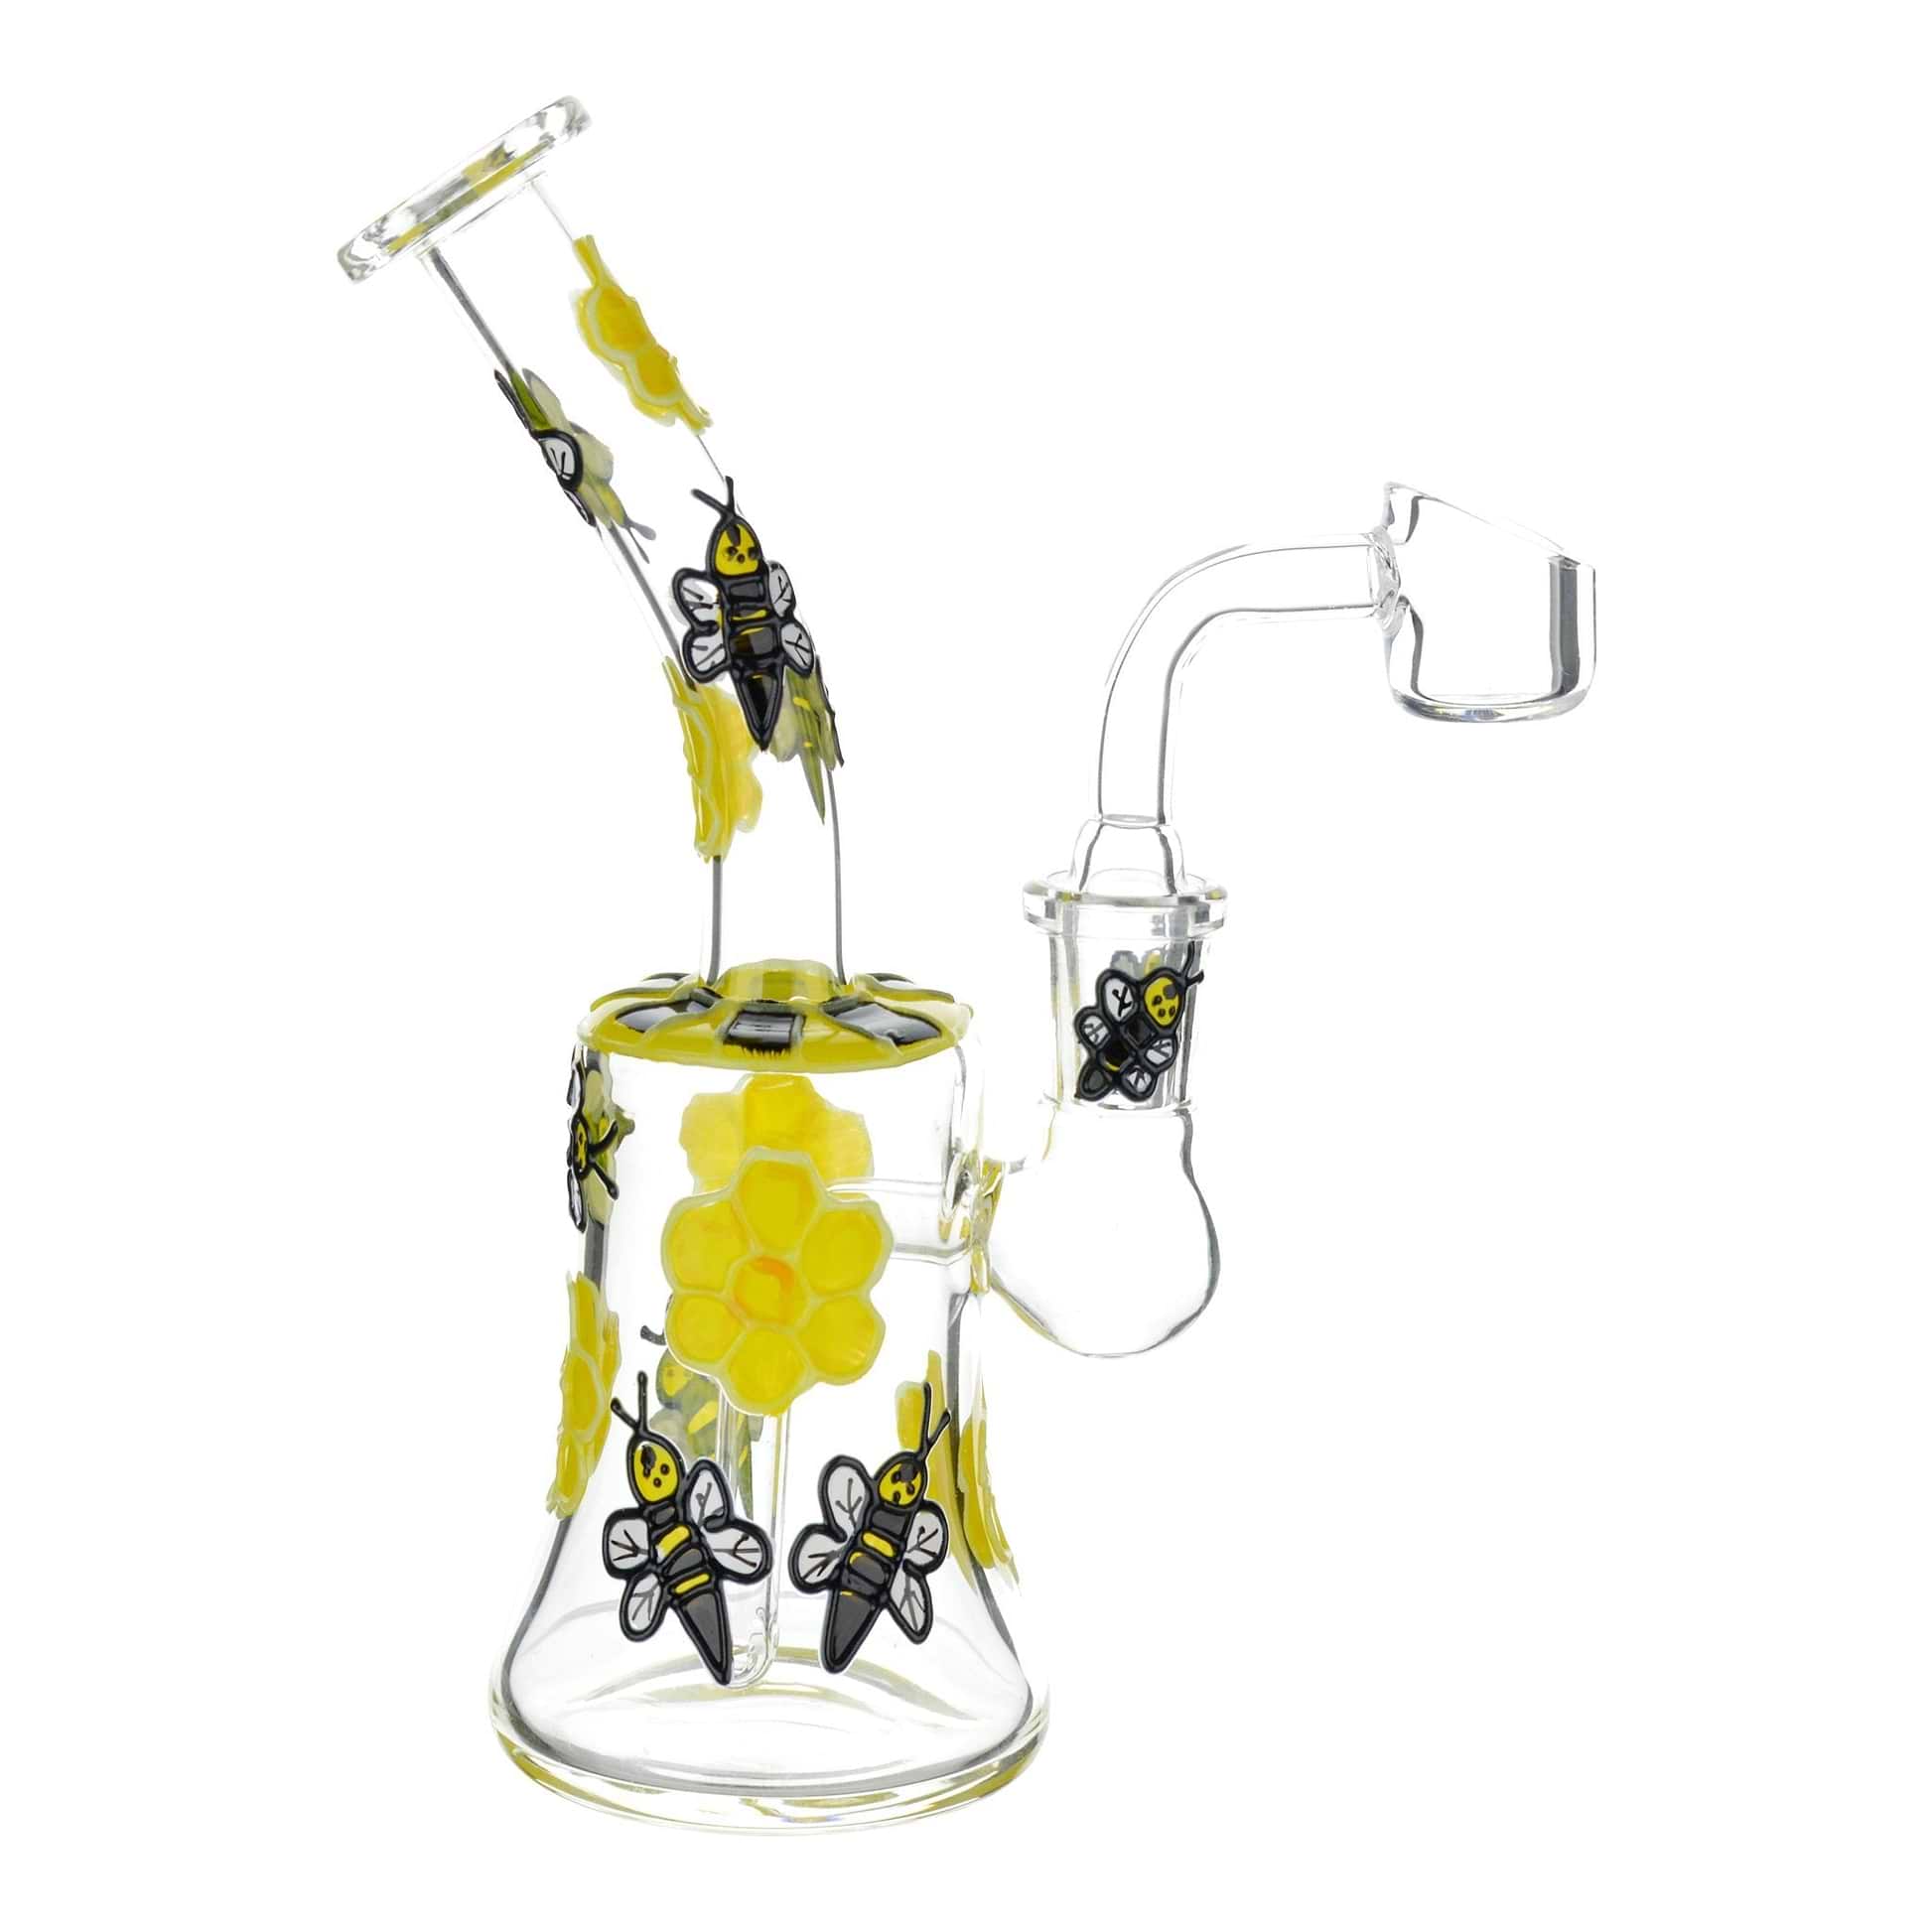 Full shot glass dab rig smoking device yellow flowers honeybee mouthpiece facing left banger facing right